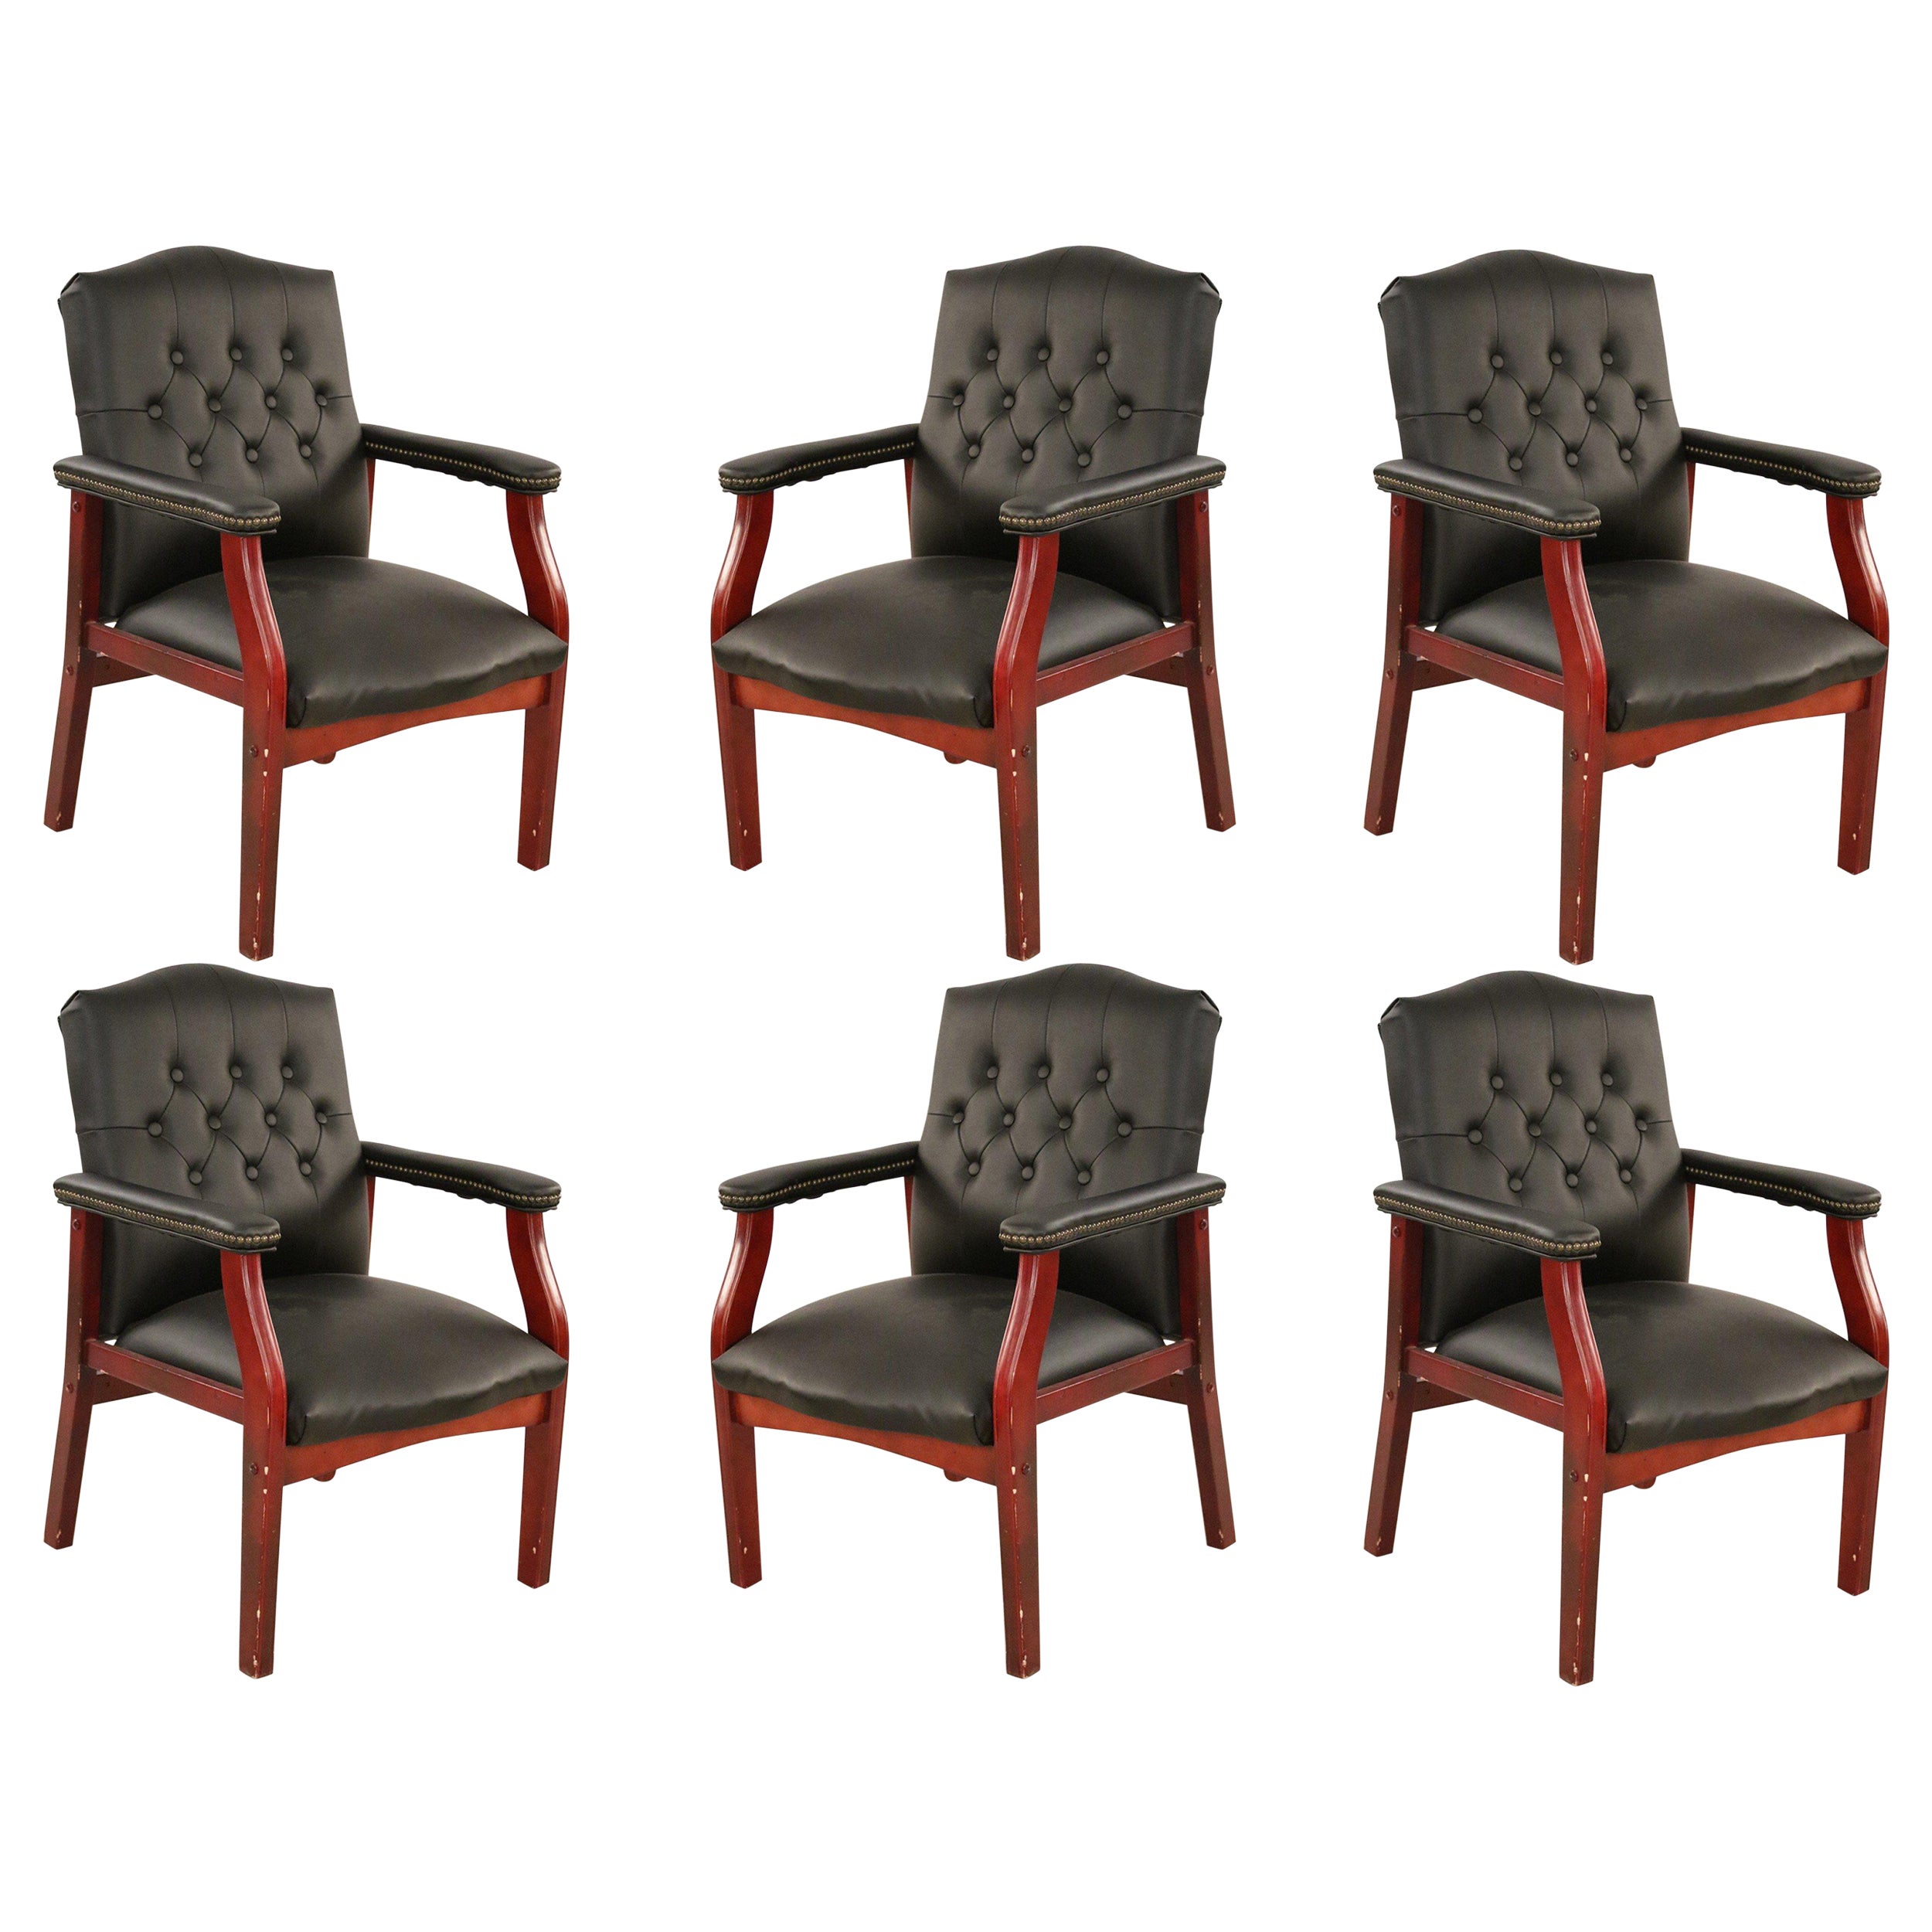 Set of 6 English Georgian Style Black Tufted Faux Leather Conference/Armchairs